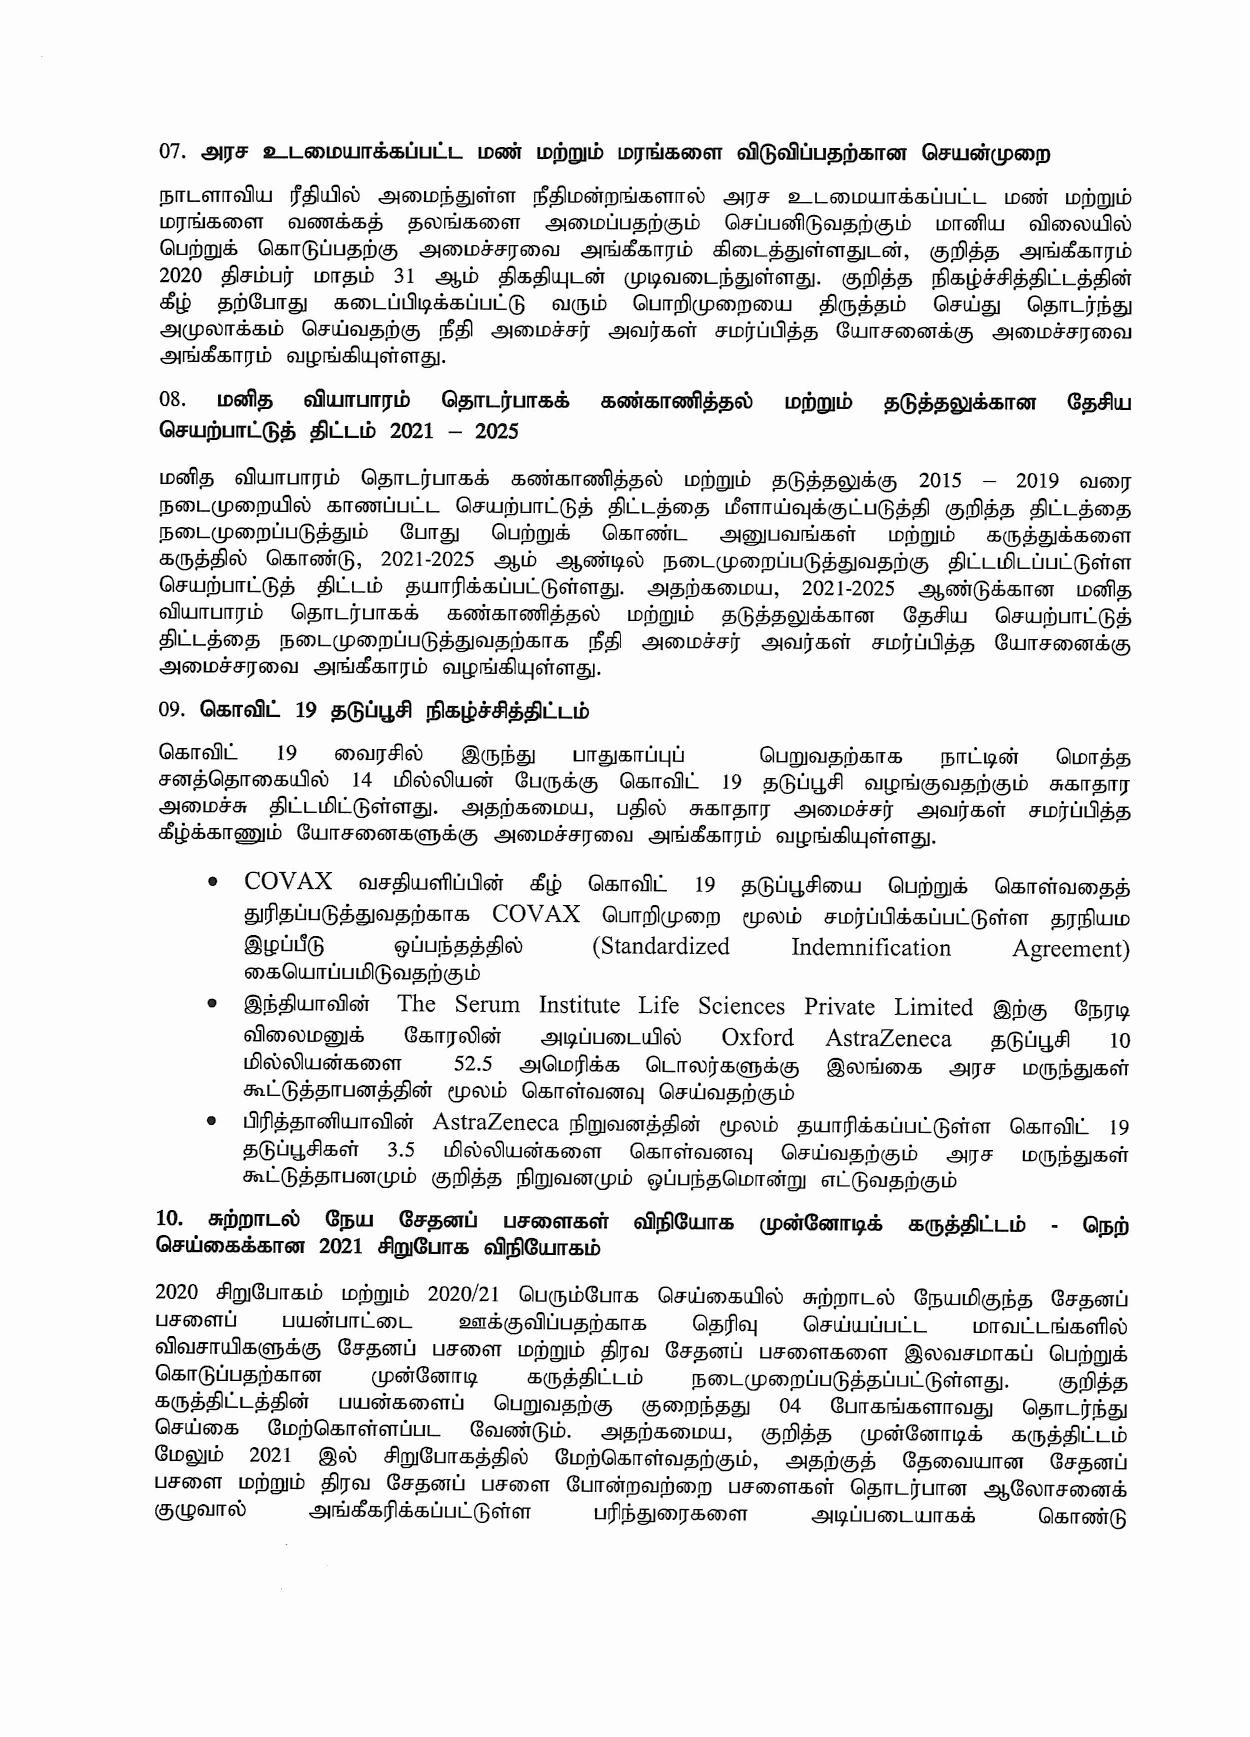 Cabinet Decision on 22.02.2021 Tamil page 003